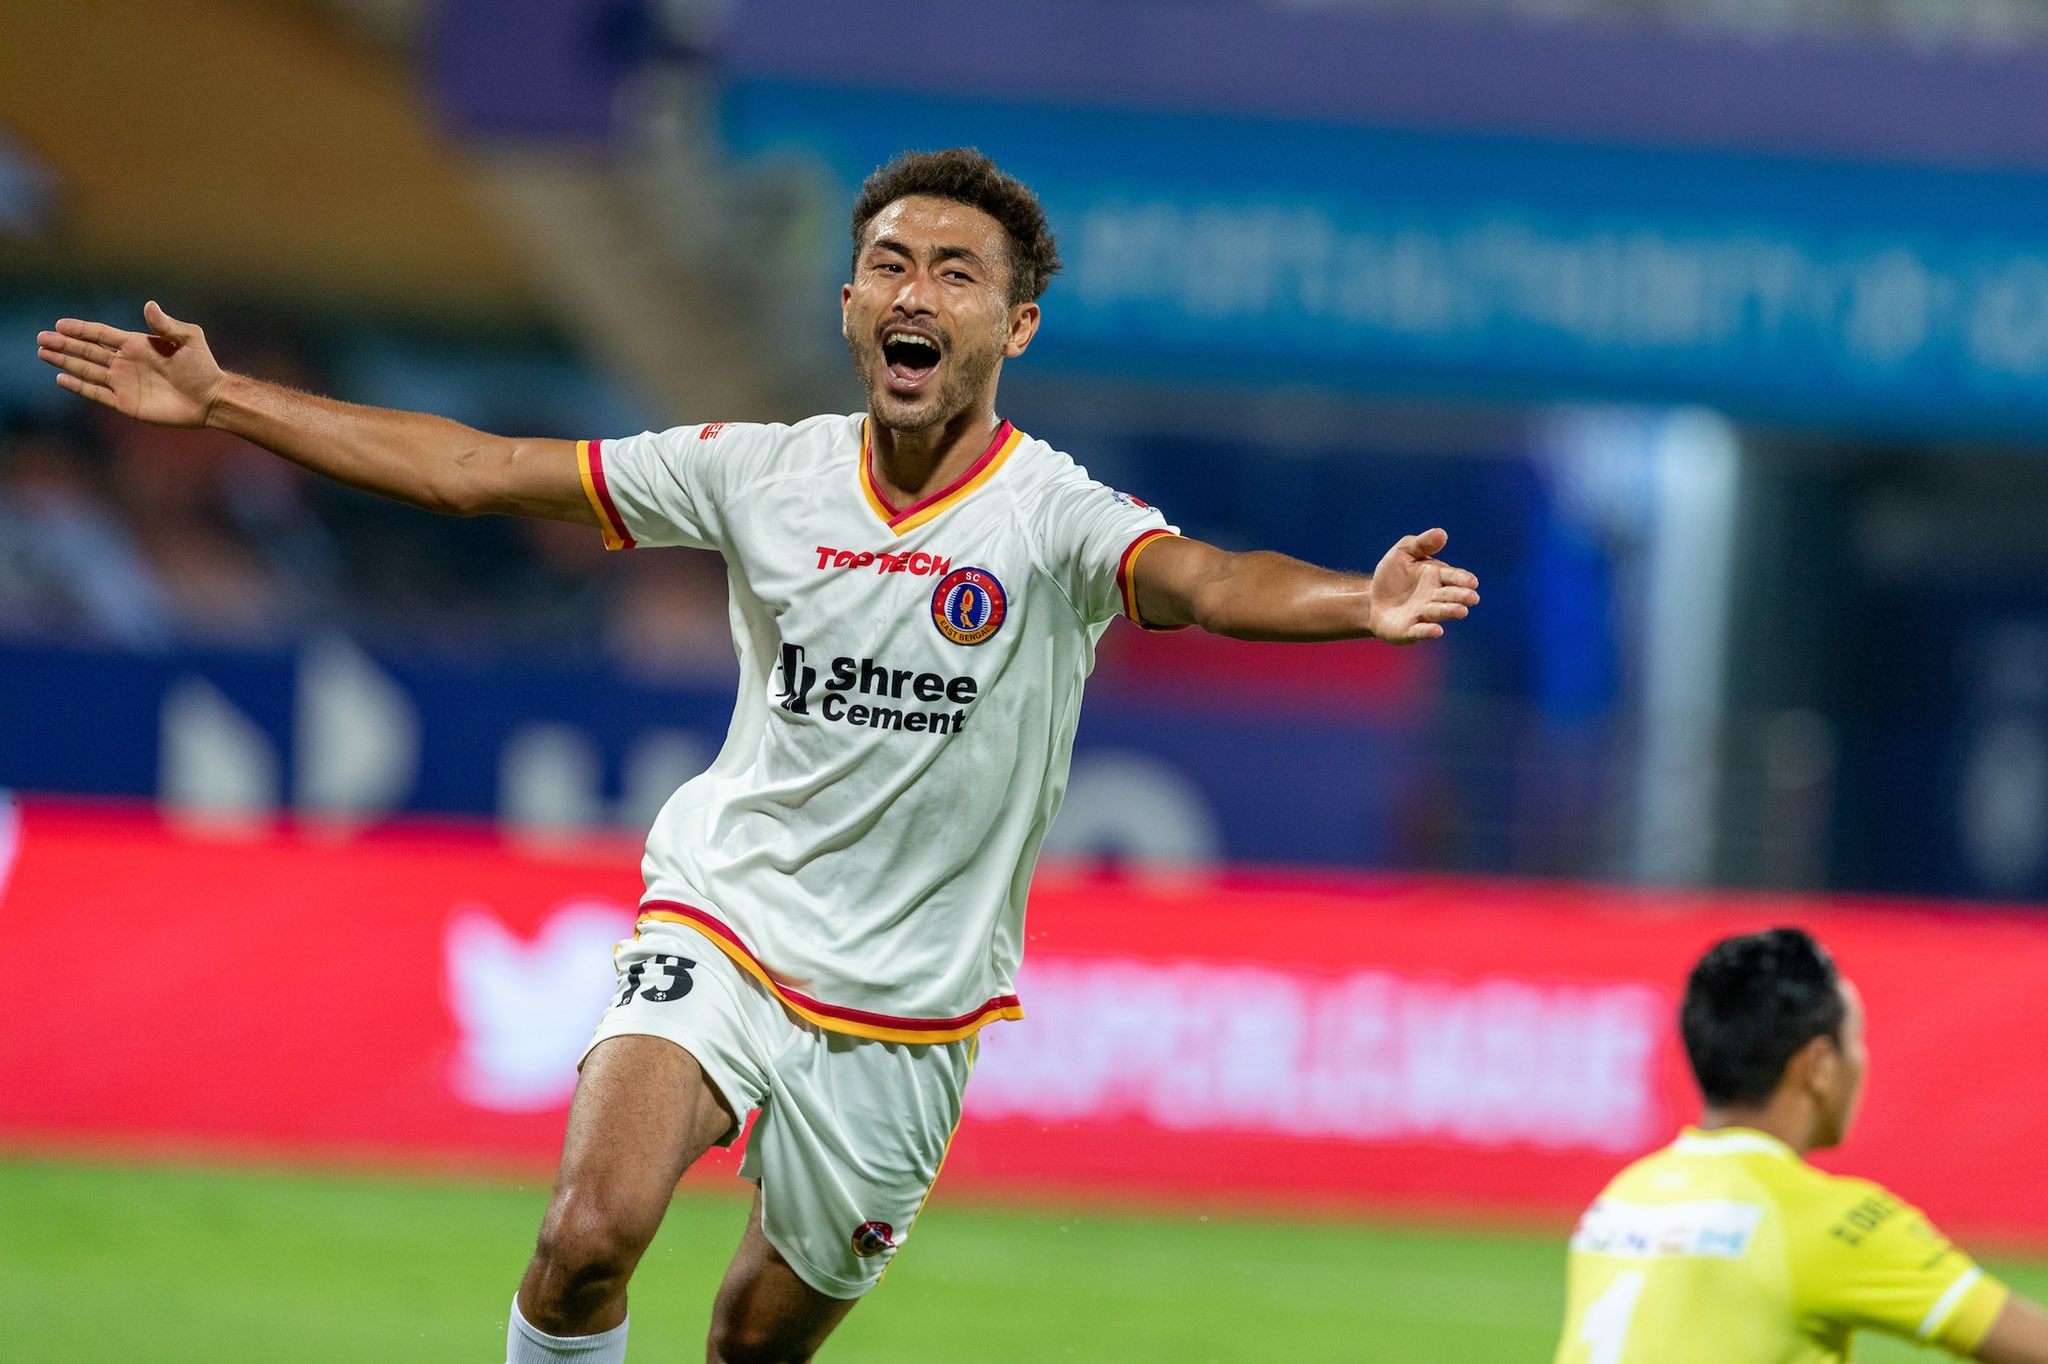 ISL Season 8 - FC Goa vs SC East Bengal: FCG 1-2 SCEB; Naorem Singh scores a brace while Noguera pulls one back for Goa to reduce the deficit at halftime